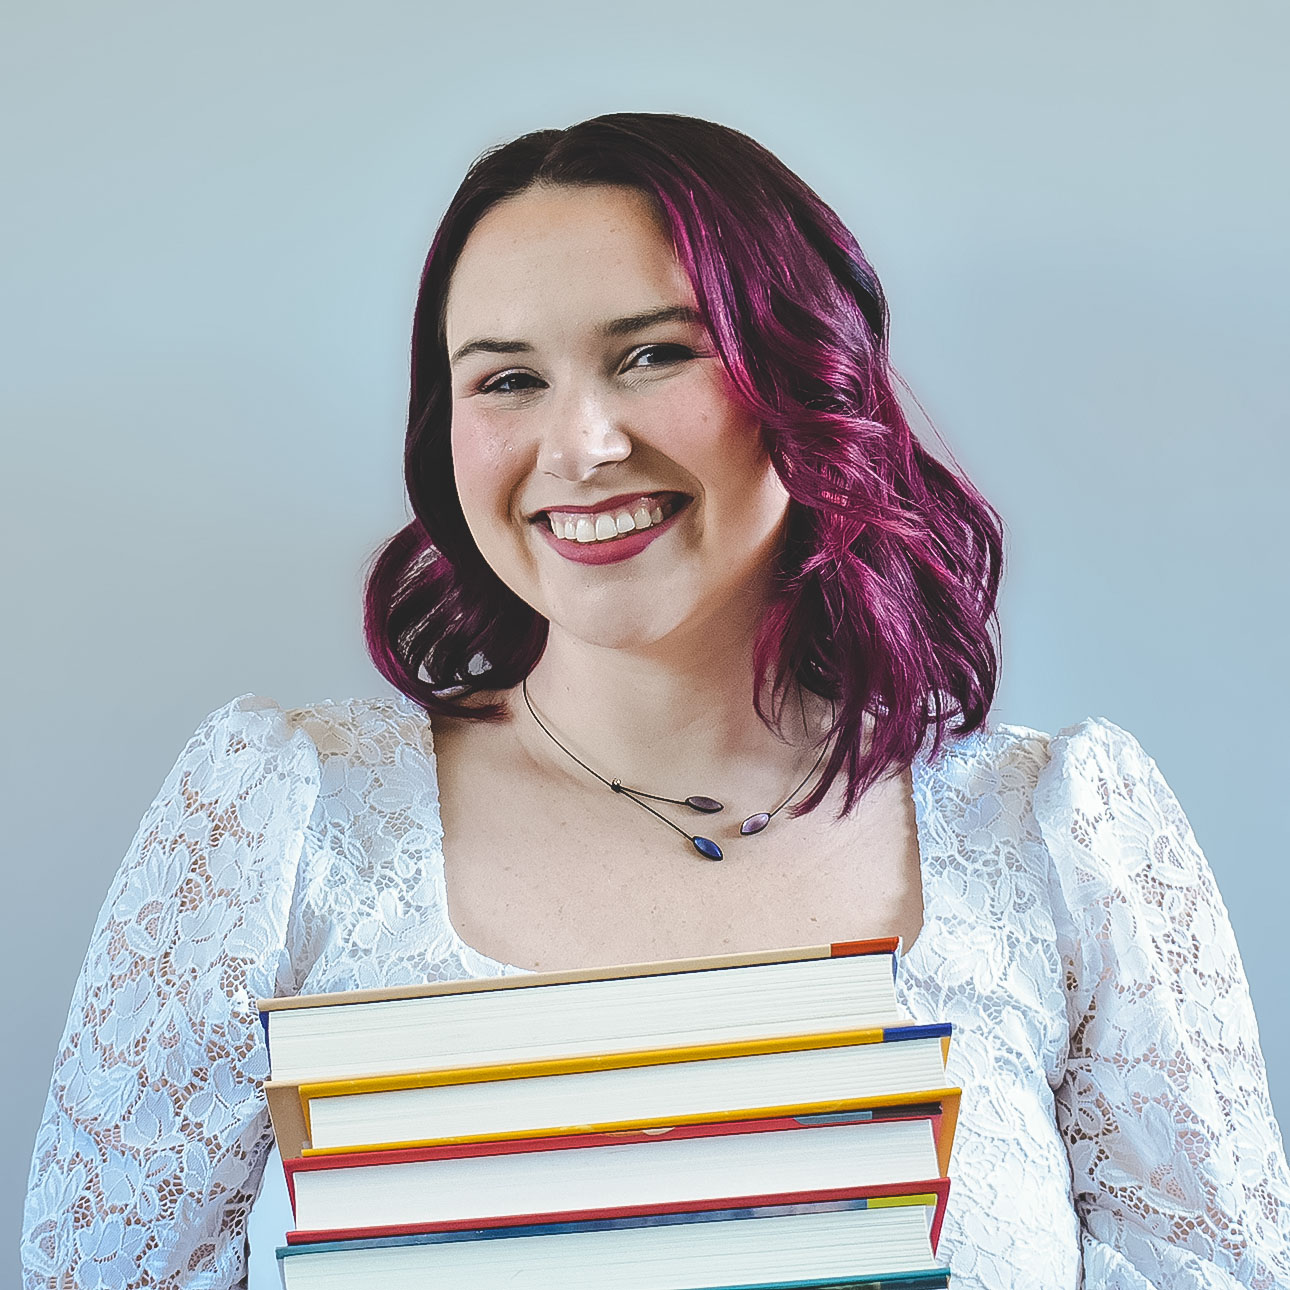 A smiling person with magenta hair wearing a white dress holding a stack of books